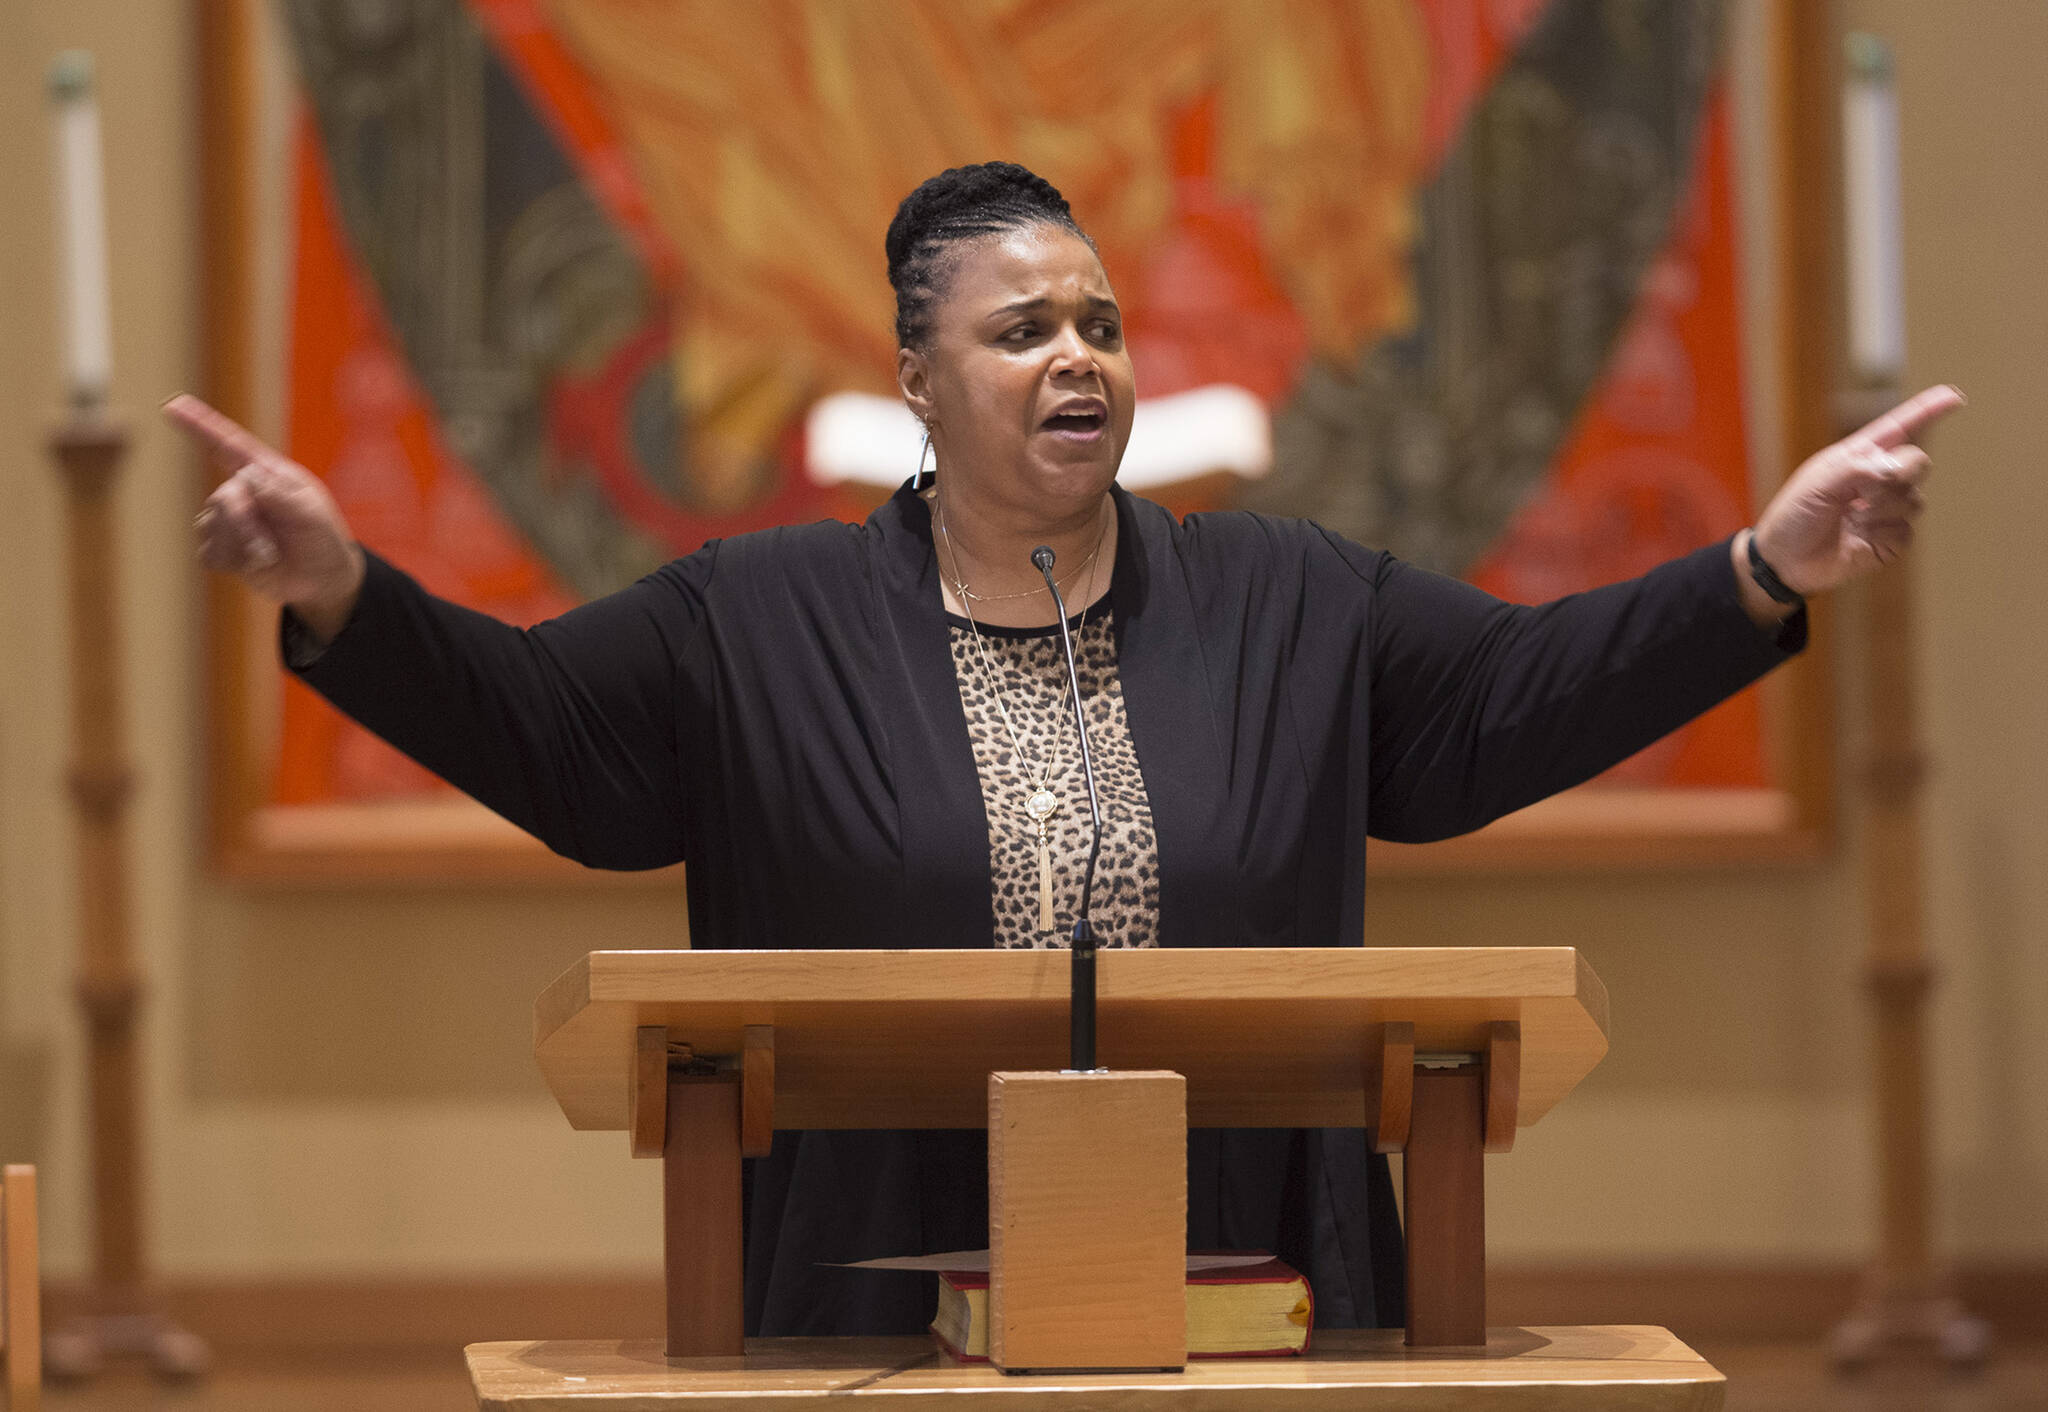 Sherry Patterson, president of the Black Awareness Association, gives the keynote address to Juneau residents during the Rev. Martin Luther King Jr. 2018 Community Celebration sponsored by the Black Awareness Association at St. Paul’s Catholic Church. On Saturday, the Black Awareness Association will host its Rise fundraiser in celebration of Black History Month at the Juneau Arts and Culture Center. (Michael Penn /.Juneau Empire File)